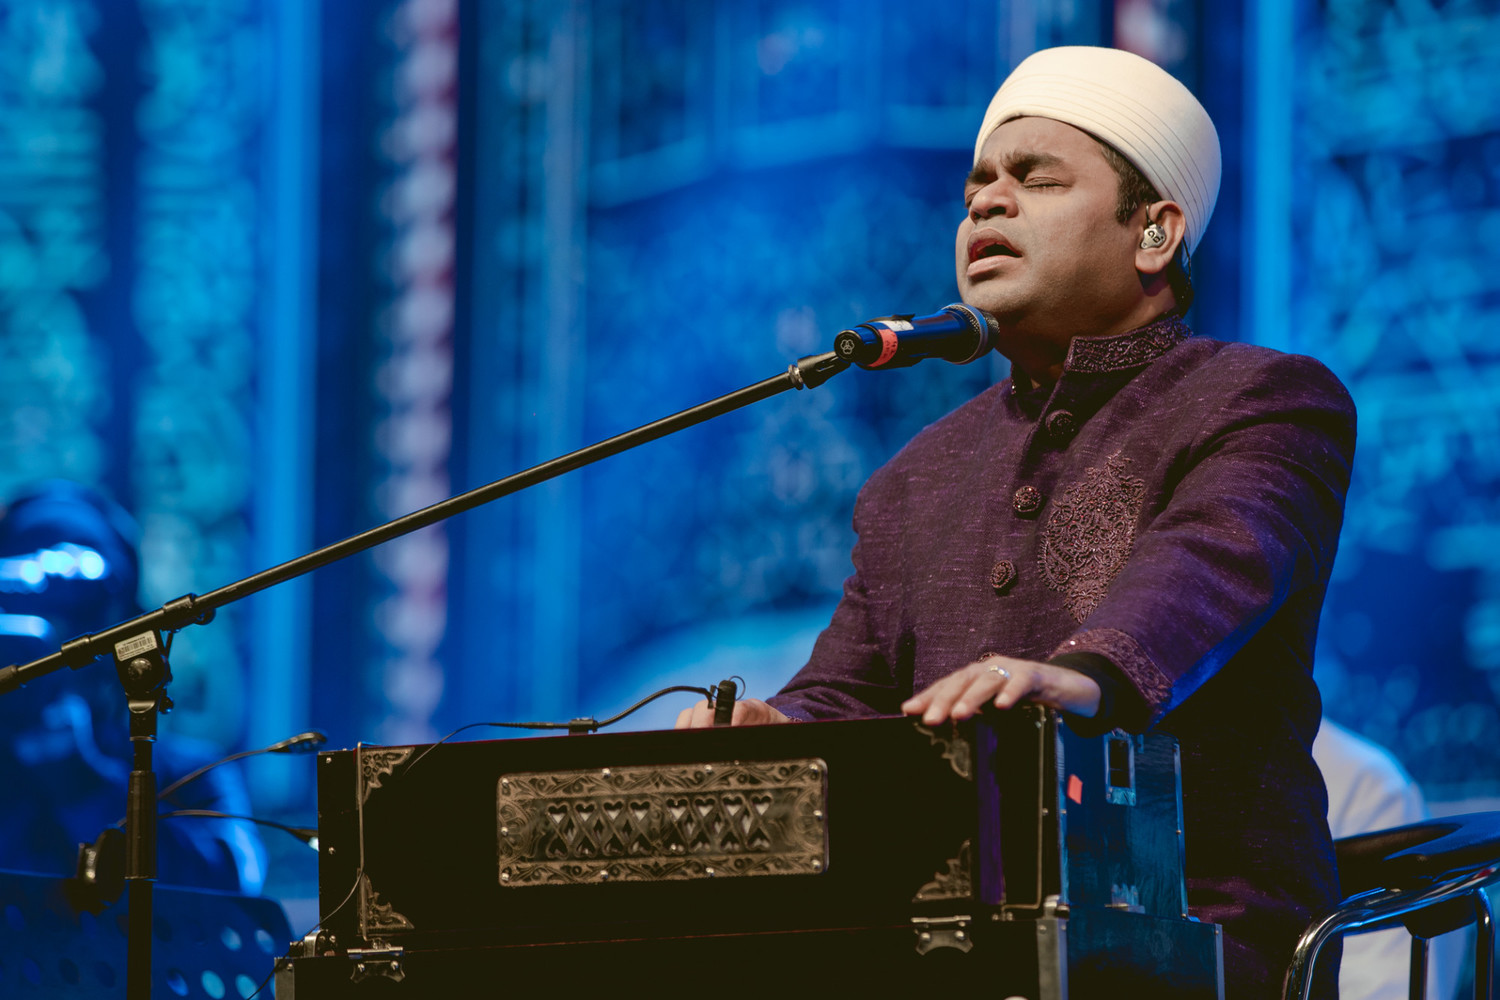 Review:  A. R. RAHMAN AND NOORAN SISTERS, Highlights Of The Global Sufi Festival 